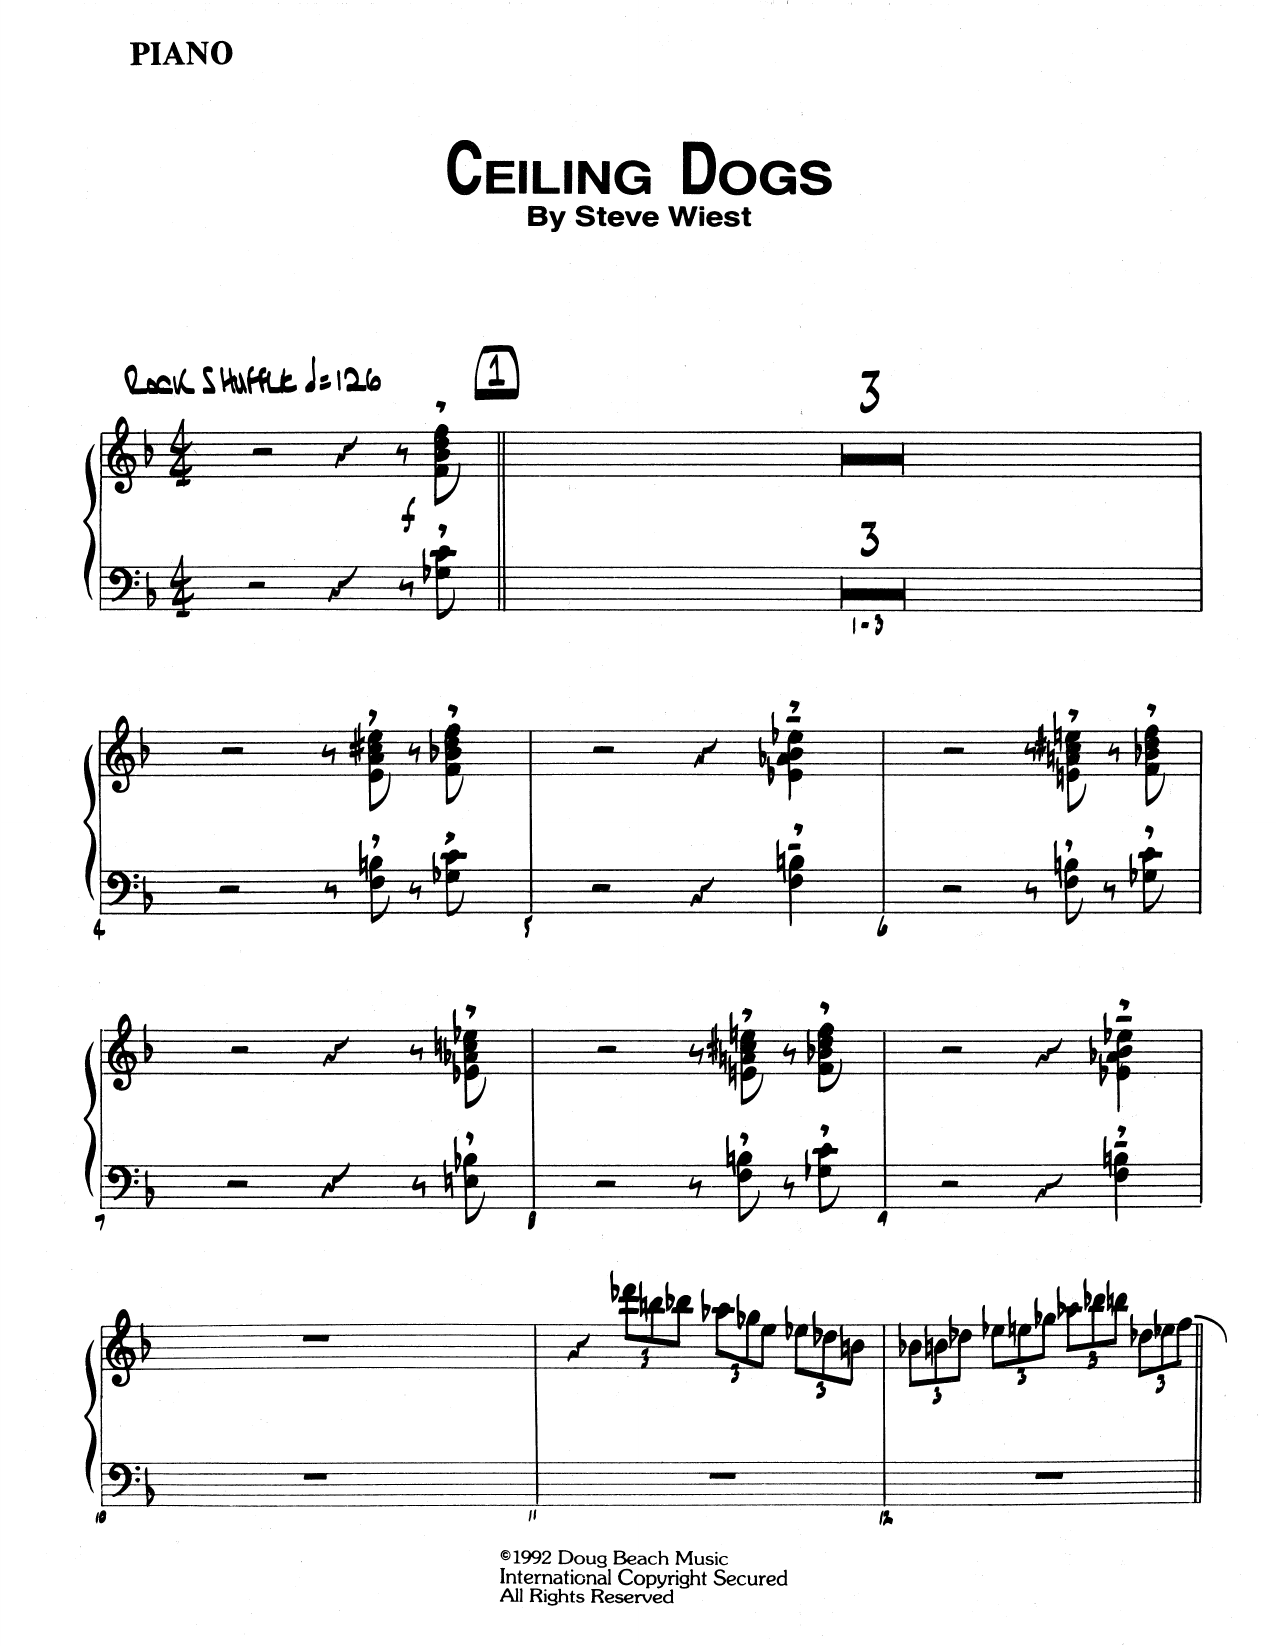 Download Steve Wiest Ceiling Dogs - Piano Sheet Music